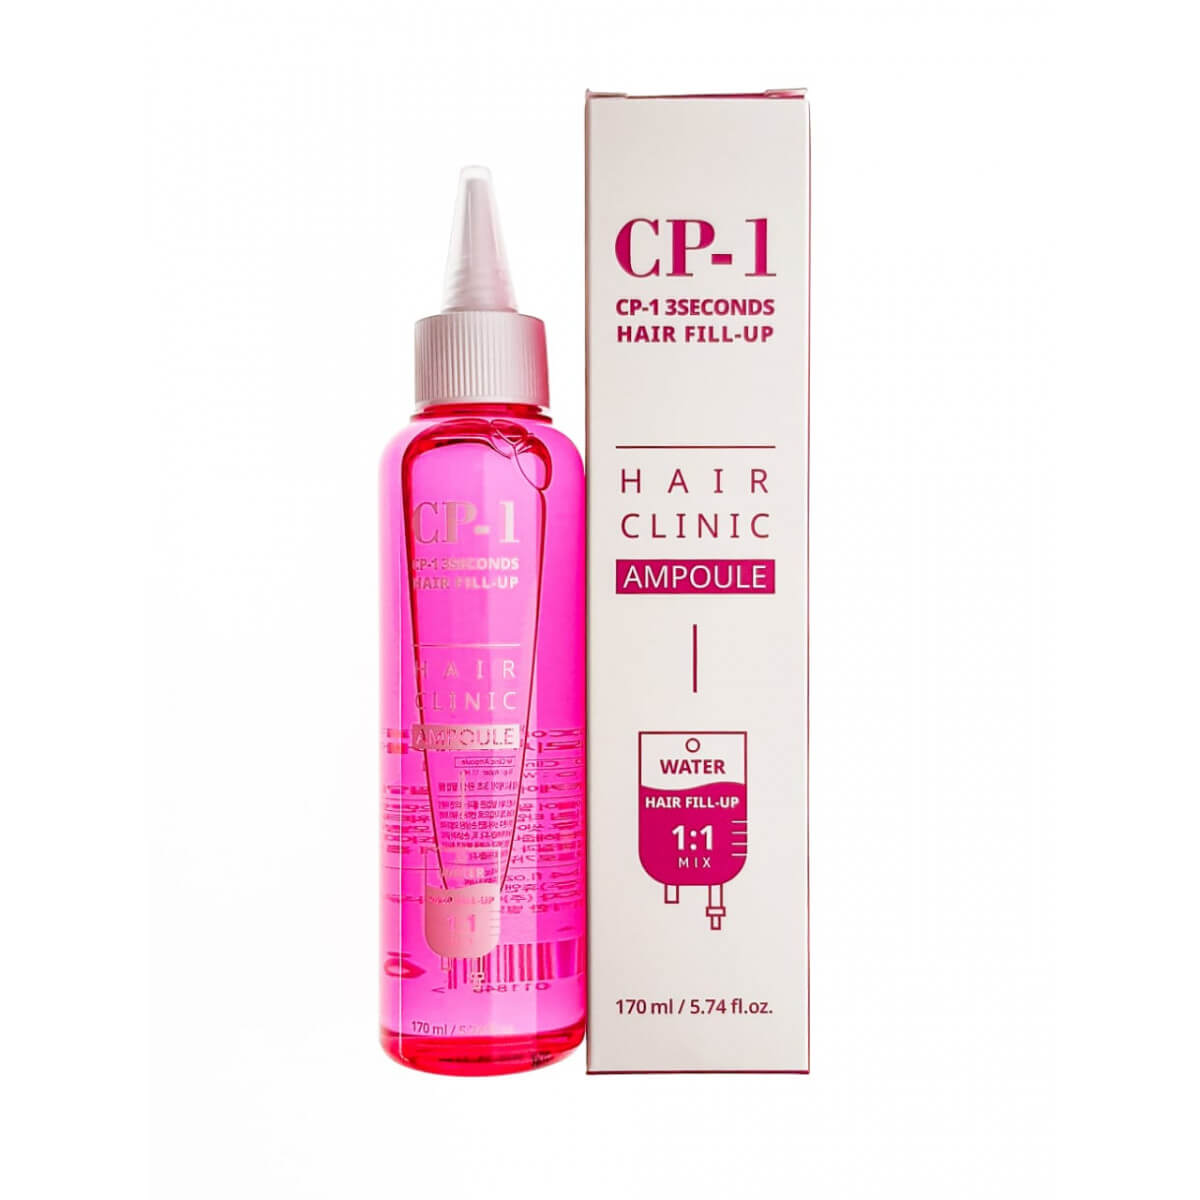 Fill-up ampoule for hair by CP-1